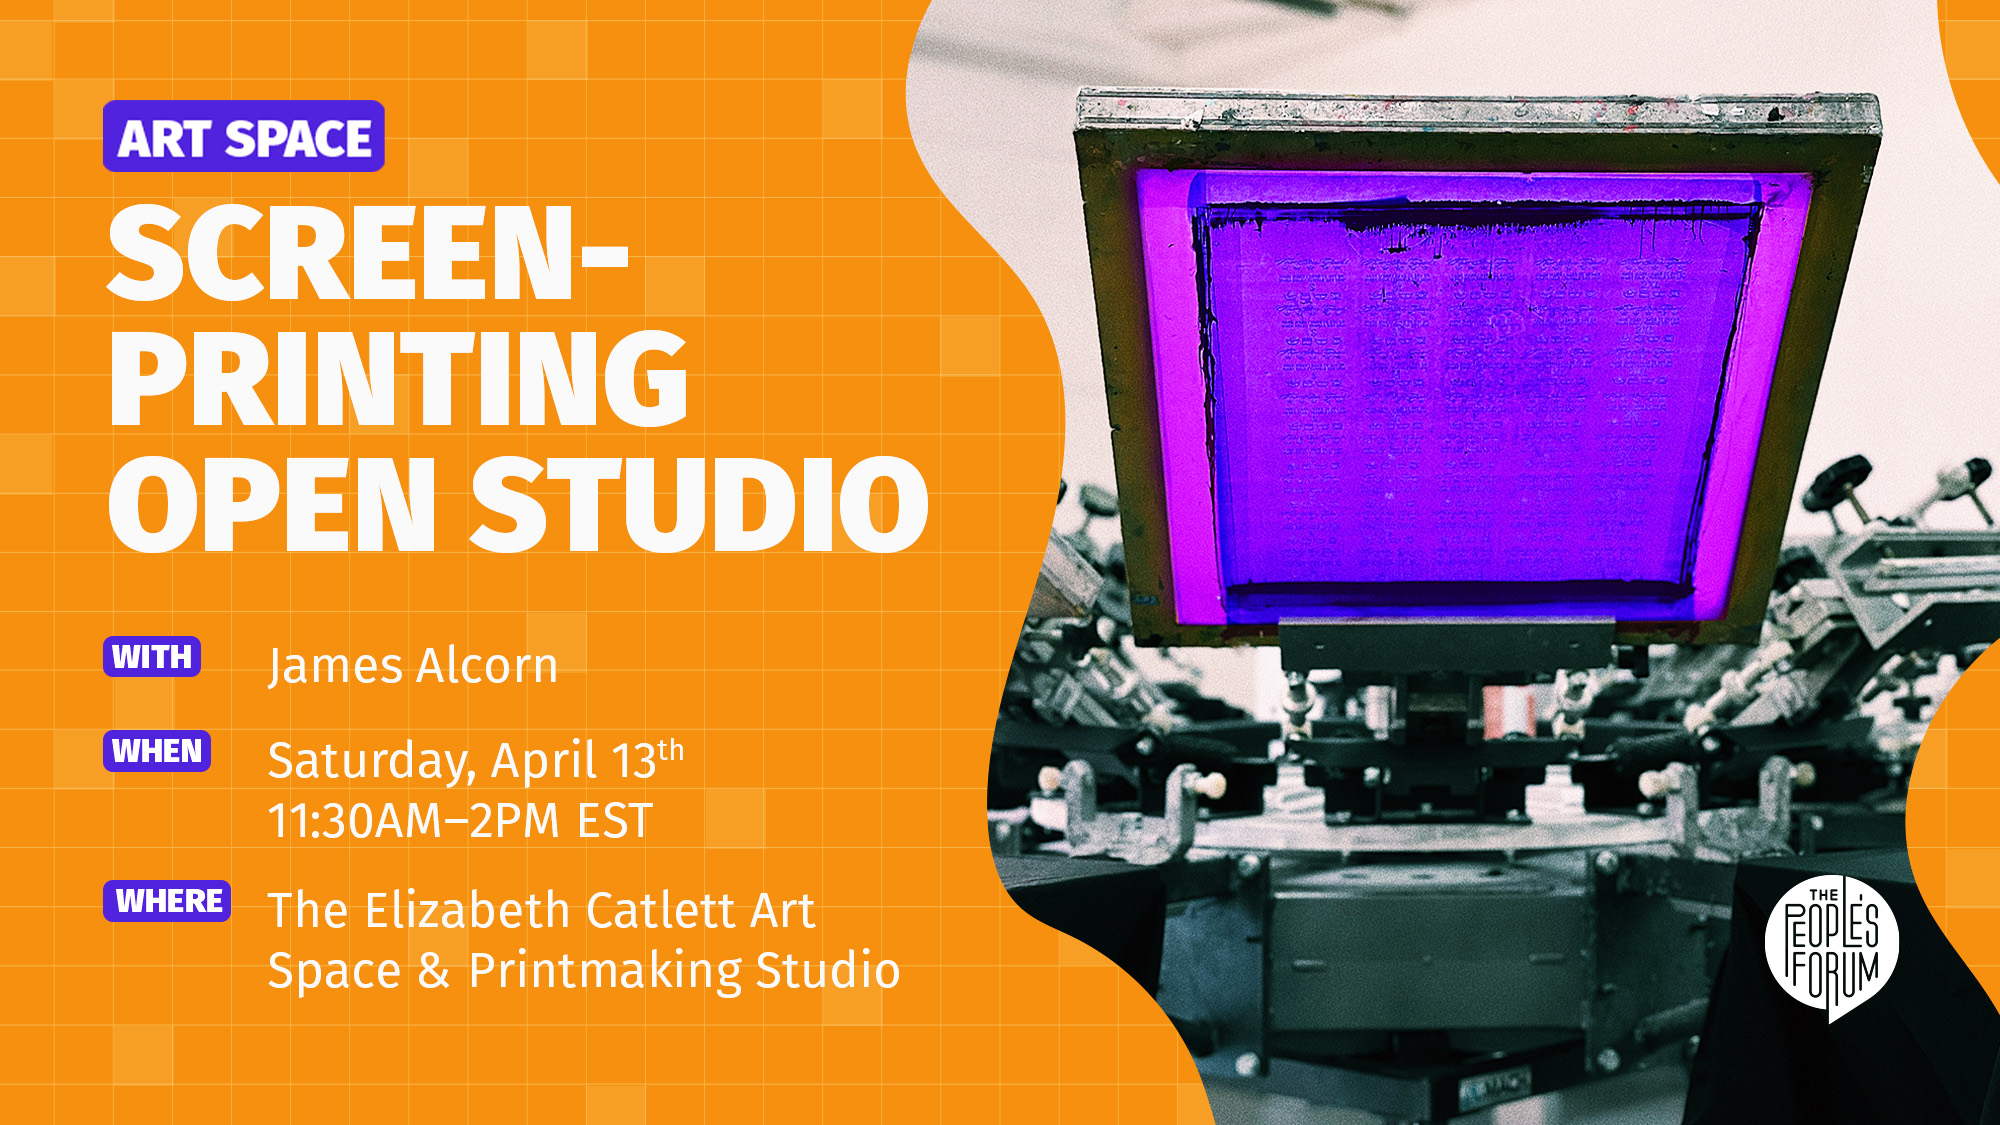 Orange banner with a photo of a screen printing machine. Screen-printing open studio saturday, april 13th at the people's forum